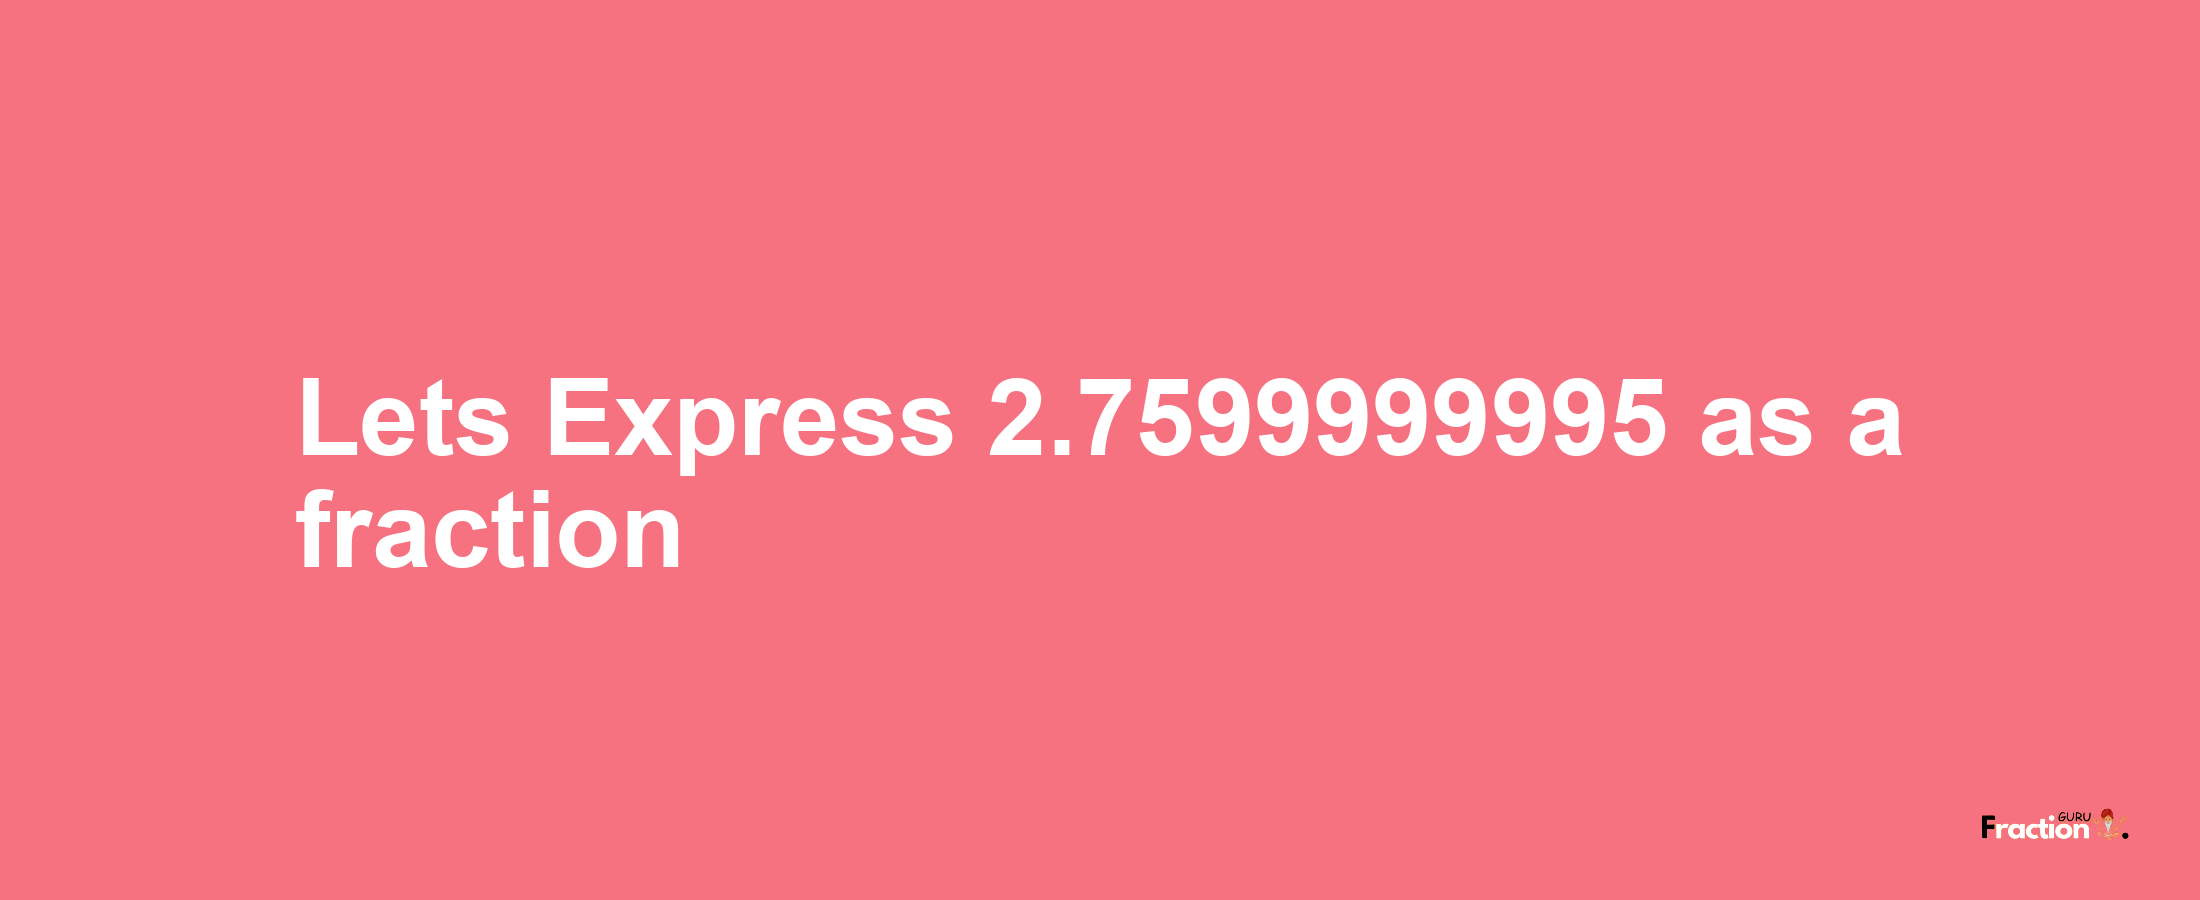 Lets Express 2.7599999995 as afraction